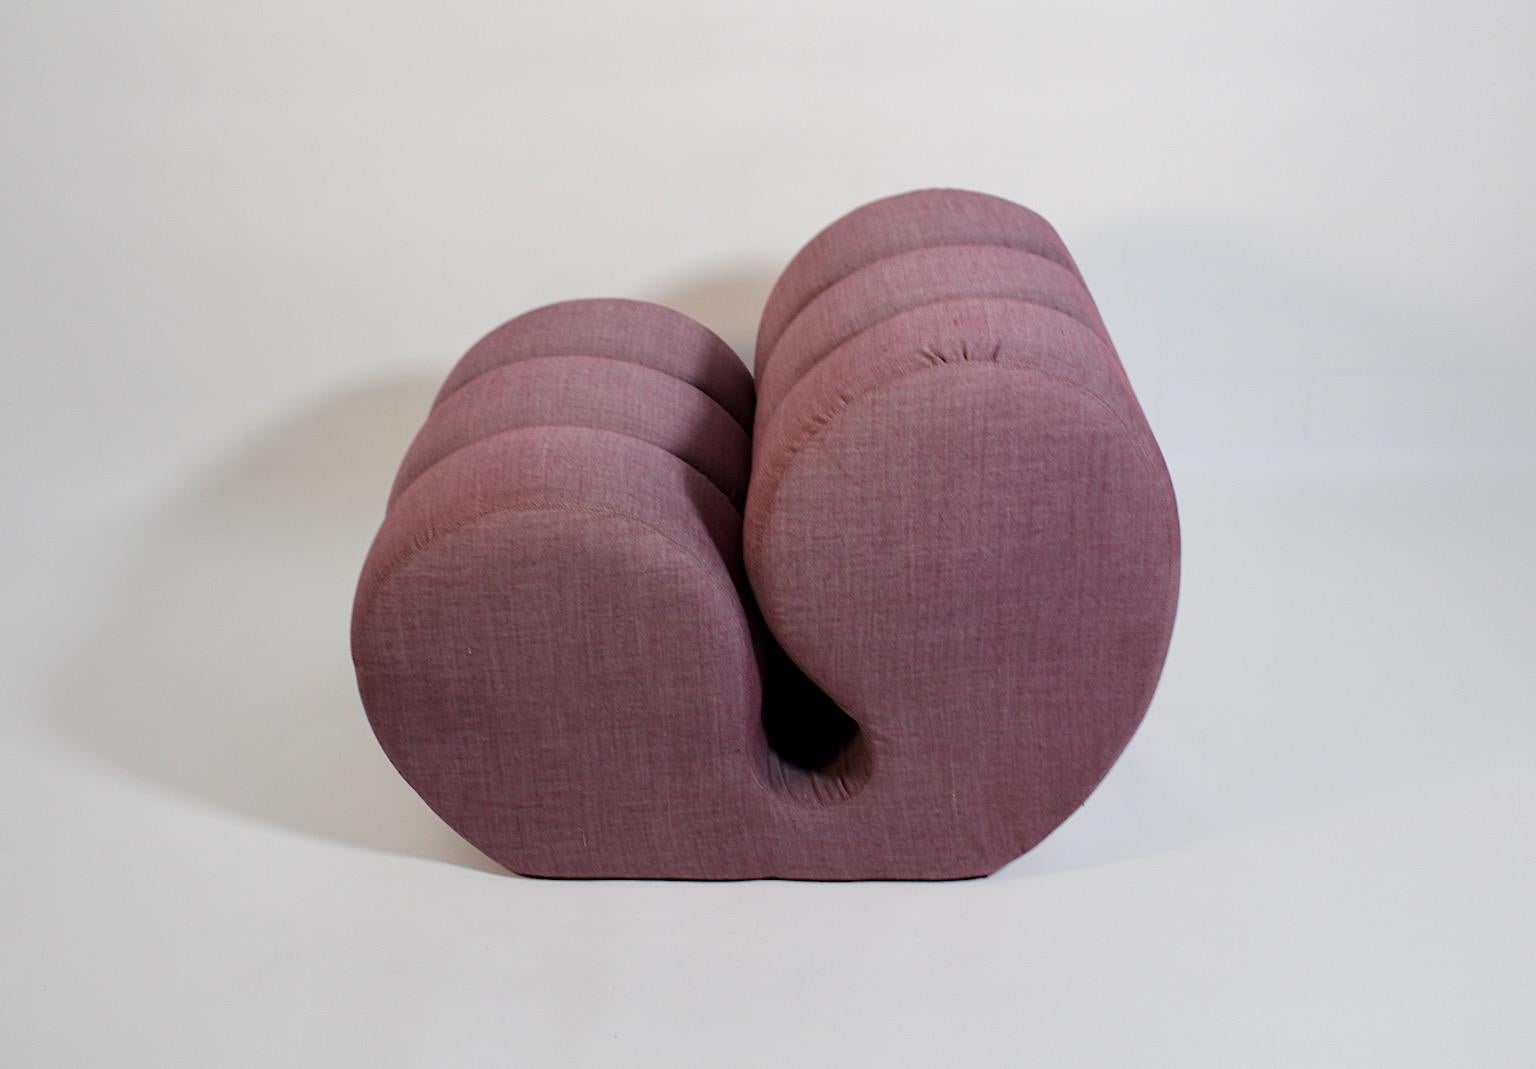 Space Age sculptural vintage lounge chair covered with lavender textile fabric.
An amazing freestanding lounge chair in curvy shape with a wonderful and comfortable seat and back, which features a beautiful silhouette.
This great lounge chair or